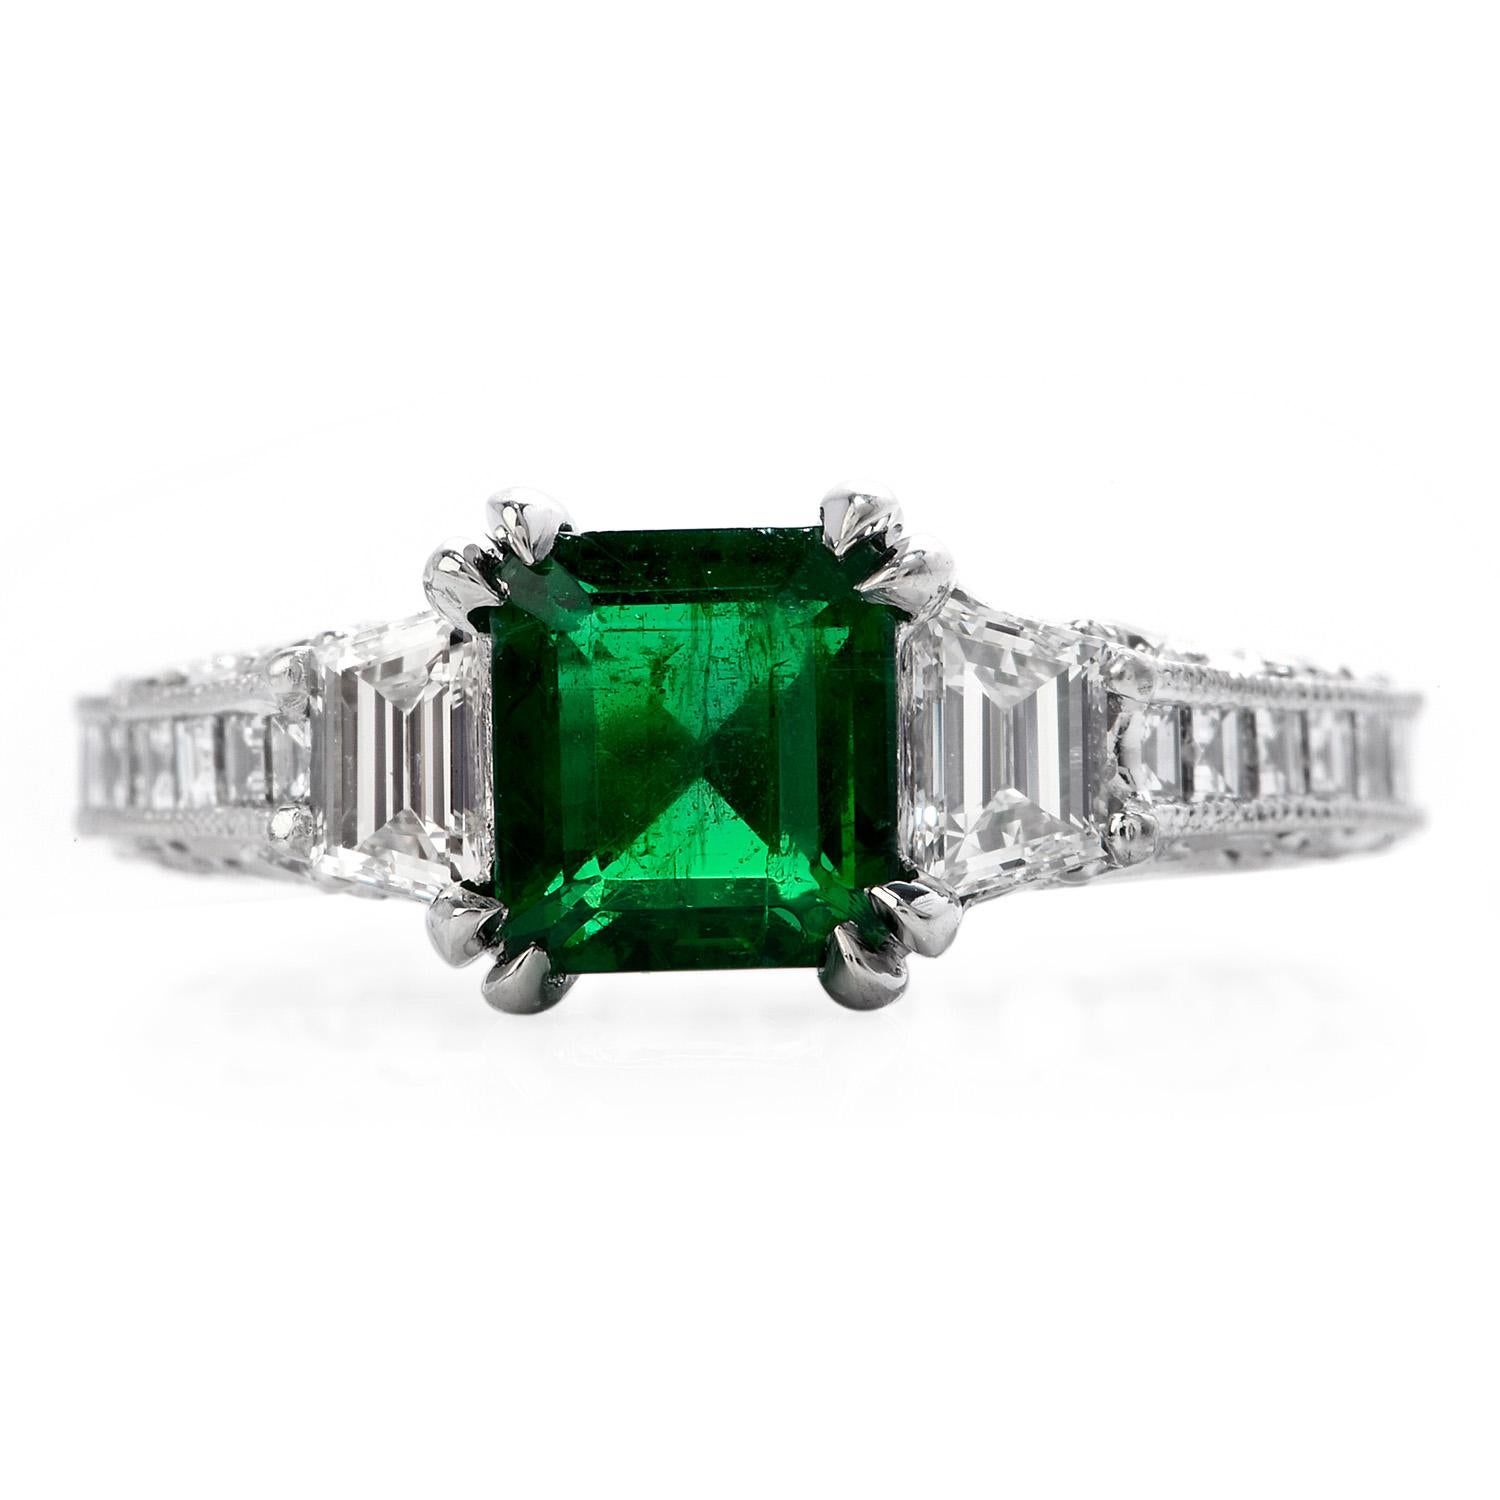 With an Eternity design, this Tacori piece with GRS-certified Emerald & Diamonds is an exquisite acquisition.

Crafted in solid heavy Platinum, the center is adorned by a GRS certified Zambian Emerald, with minor treatment, prong-set, octagonal cut,